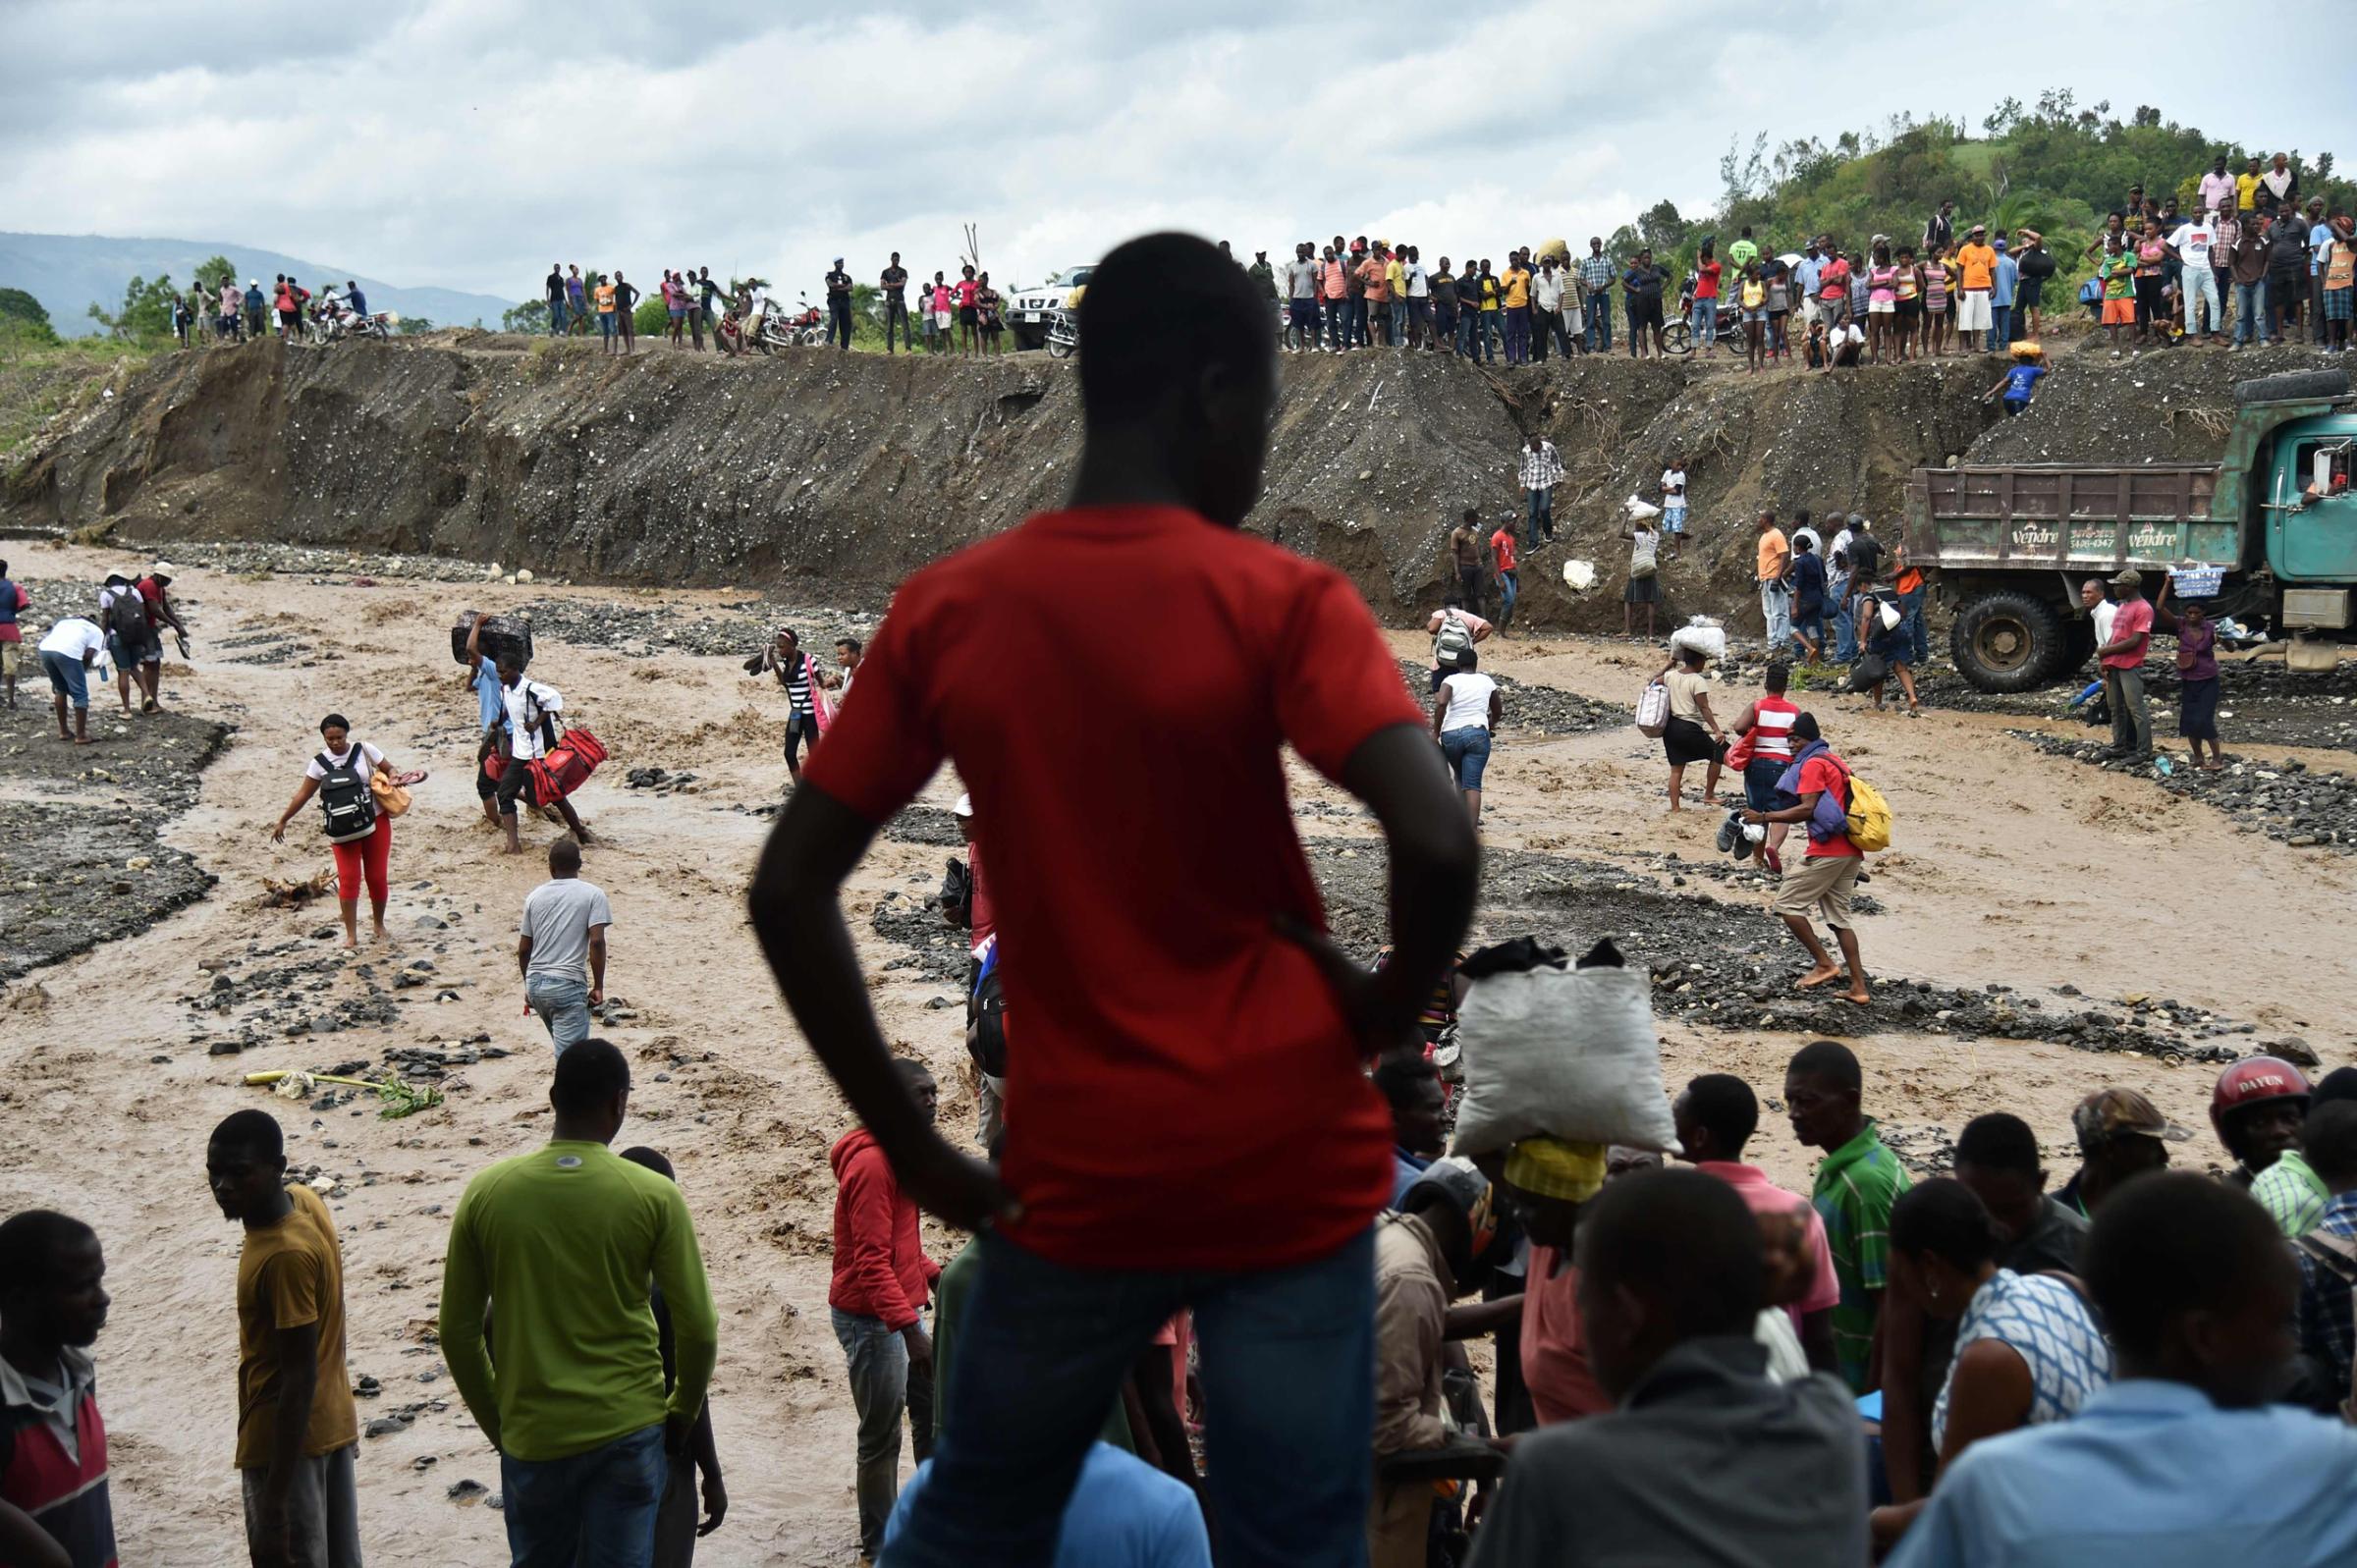 Haitian people cross the river La Digue in Petit Goave where the bridge collapsed during the rains from Hurricane Matthew, southwest of Port-au-Prince, October 6, 2016. Hurricane Matthew has left at least 23 people dead in Haiti, a toll likely to climb as authorities re-establish contact with the hardest-hit areas where the damage is "catastrophic," officials said. The Caribbean's worst storm in nearly a decade, Matthew slammed into Haiti, the Americas' poorest nation, with heavy rains and devastating winds triggering severe flooding and mud slides. / AFP PHOTO / HECTOR RETAMALHECTOR RETAMAL/AFP/Getty Images